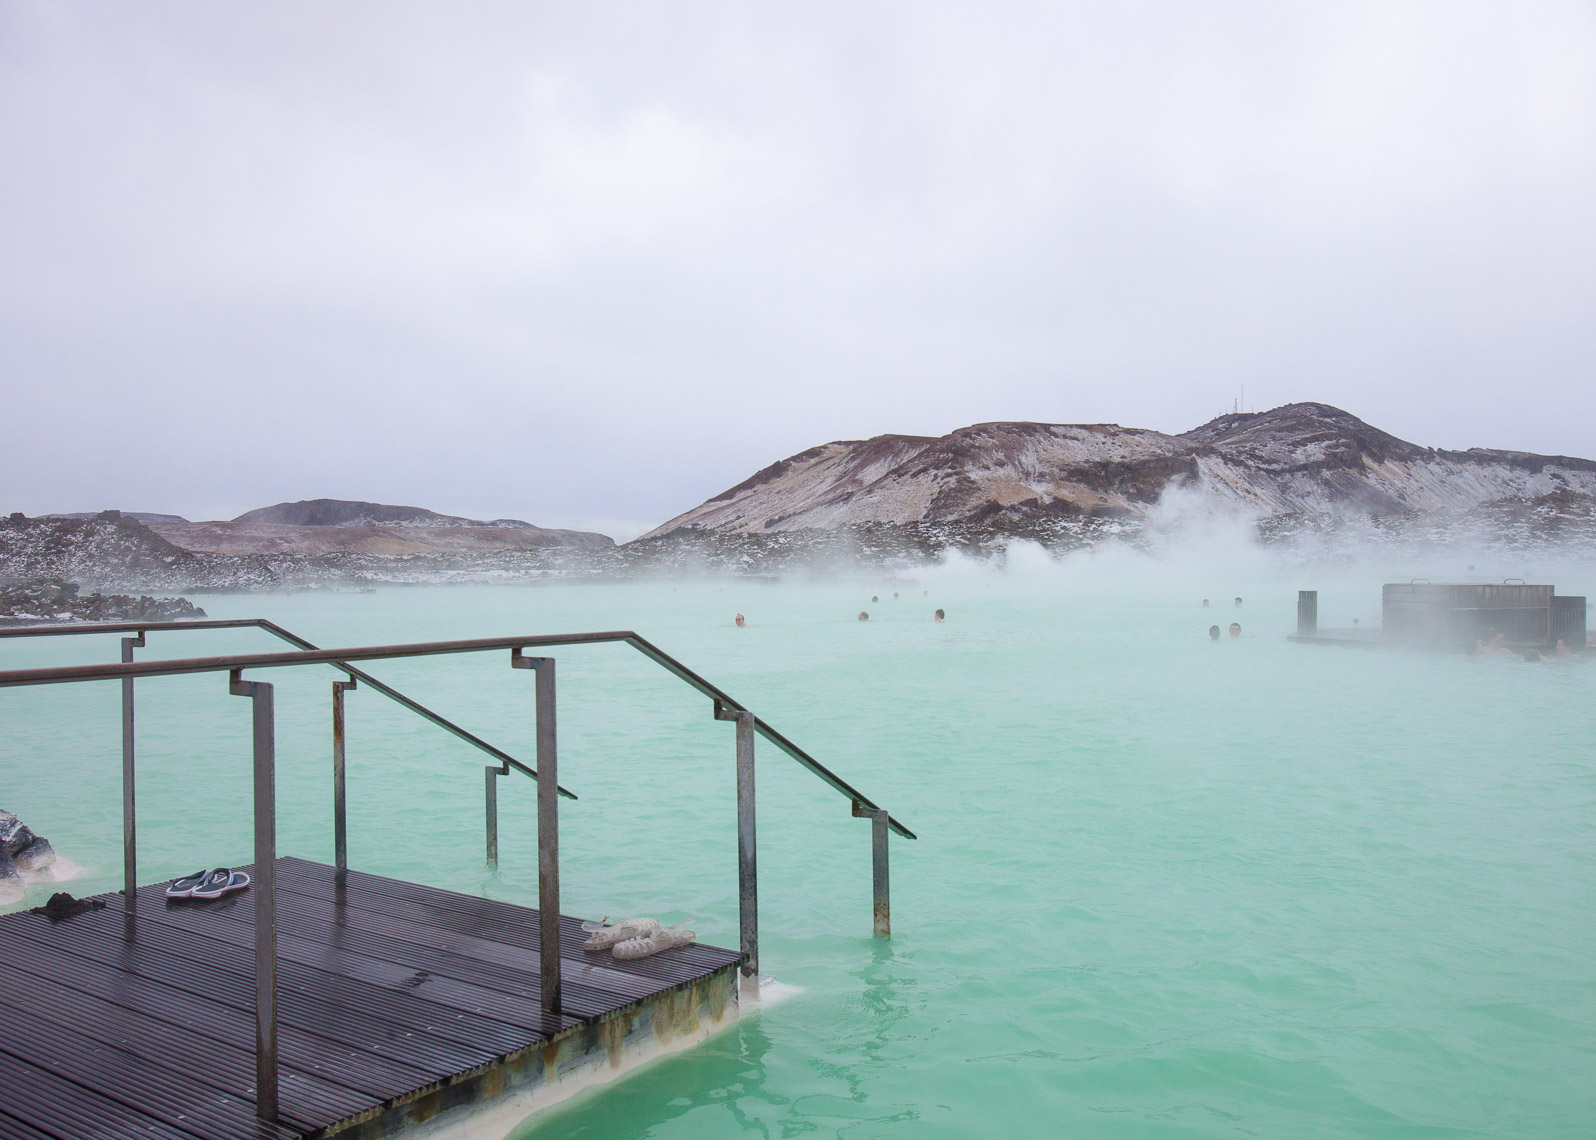 Stairway into the Blue Lagoon in Iceland